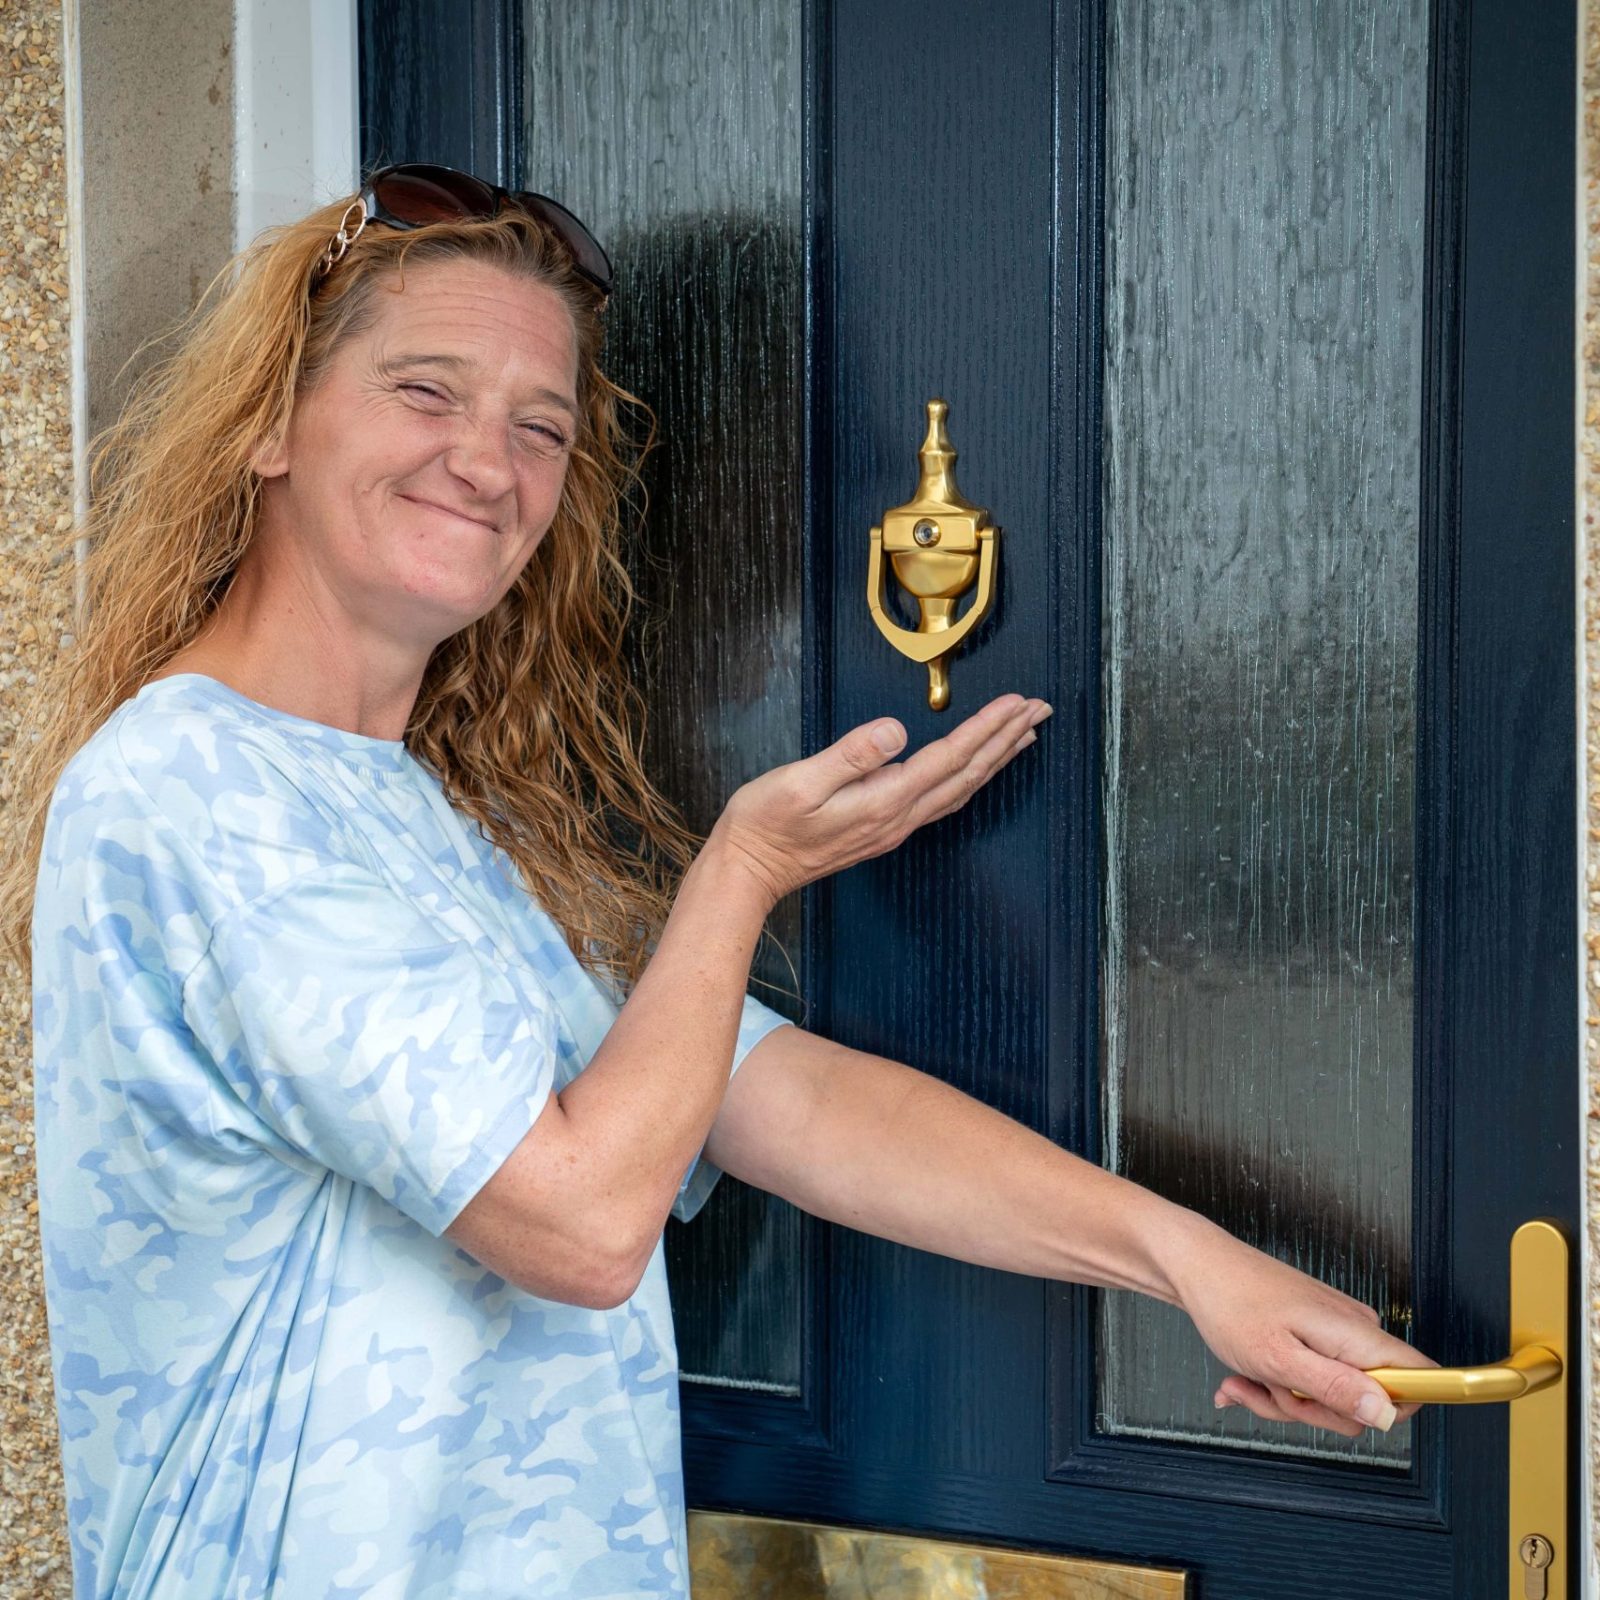 Trivallis Housing Landlord Wales A woman with sunglasses on her head is smiling while presenting or gesturing toward a black Trivallis housing door with a brass knocker and handle.